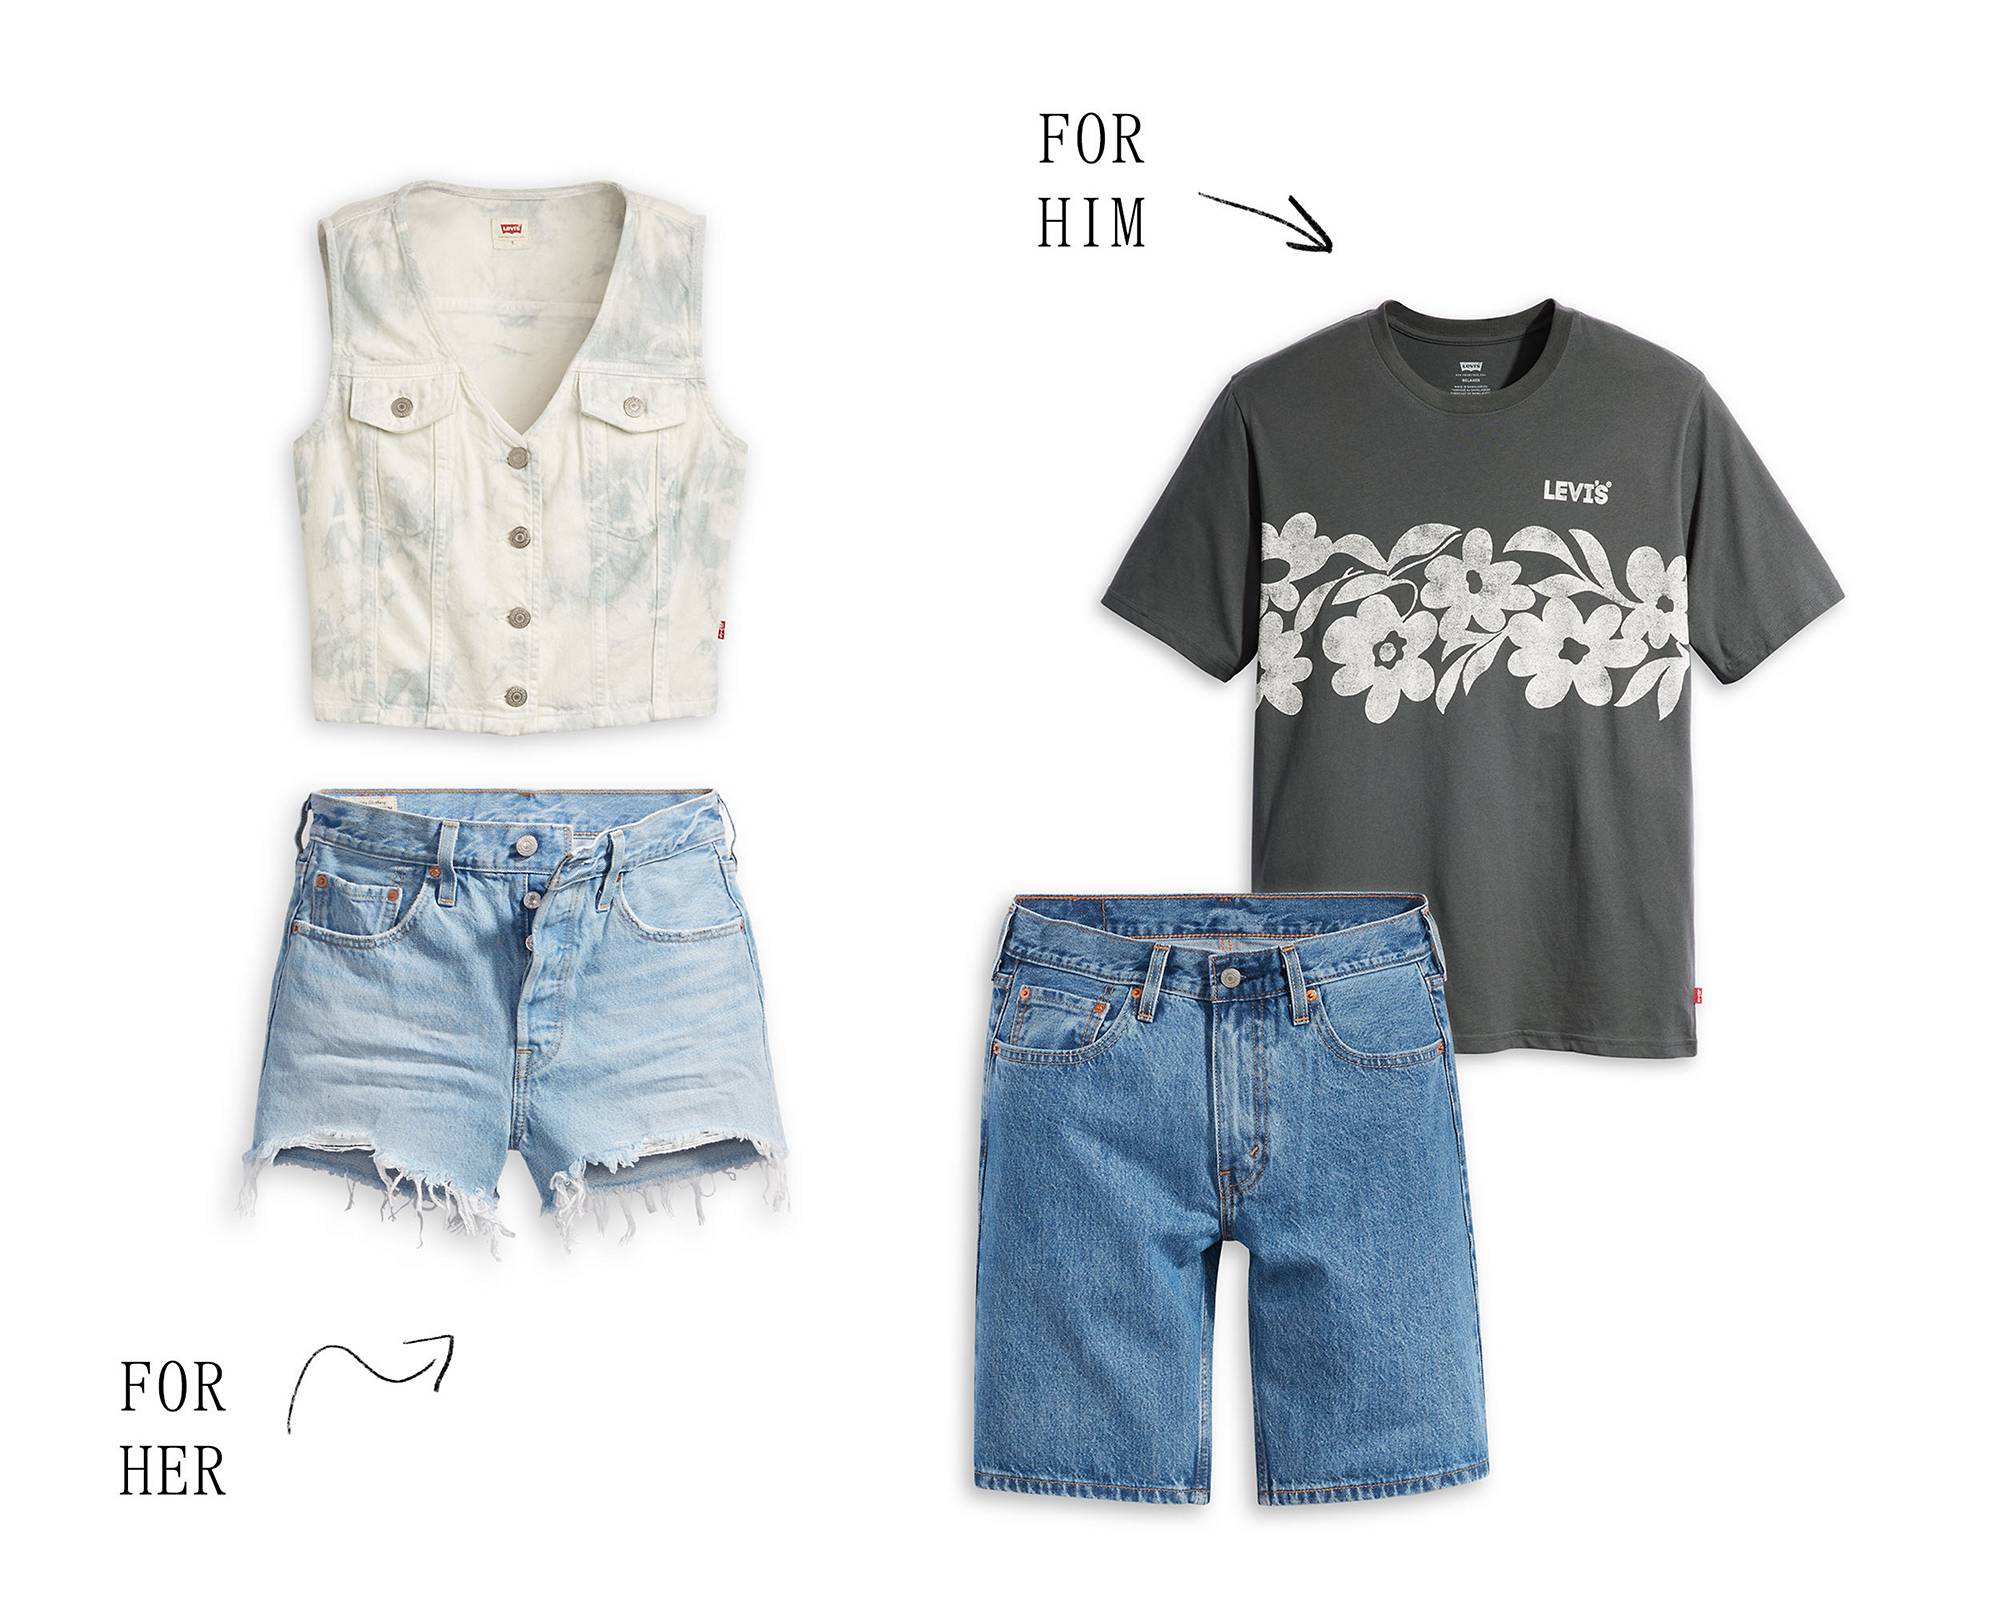 Flat lay outfit styling for a picnic